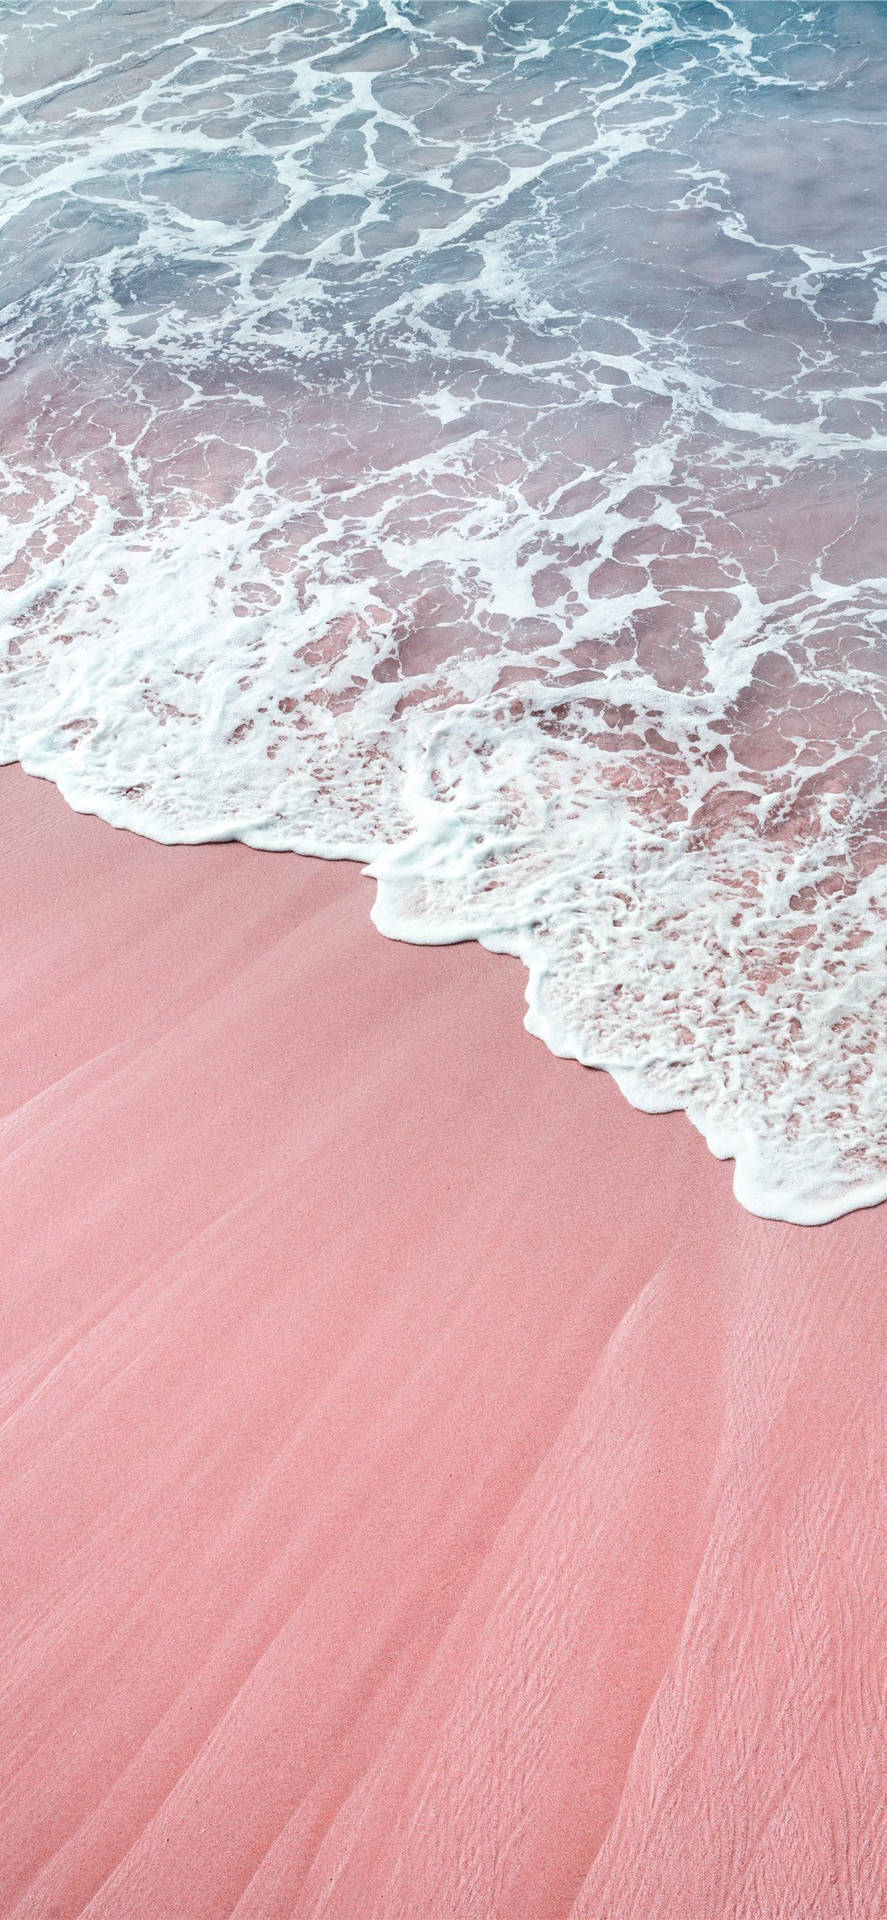 Rose Gold iPad Beach With Crystal Water Wallpaper